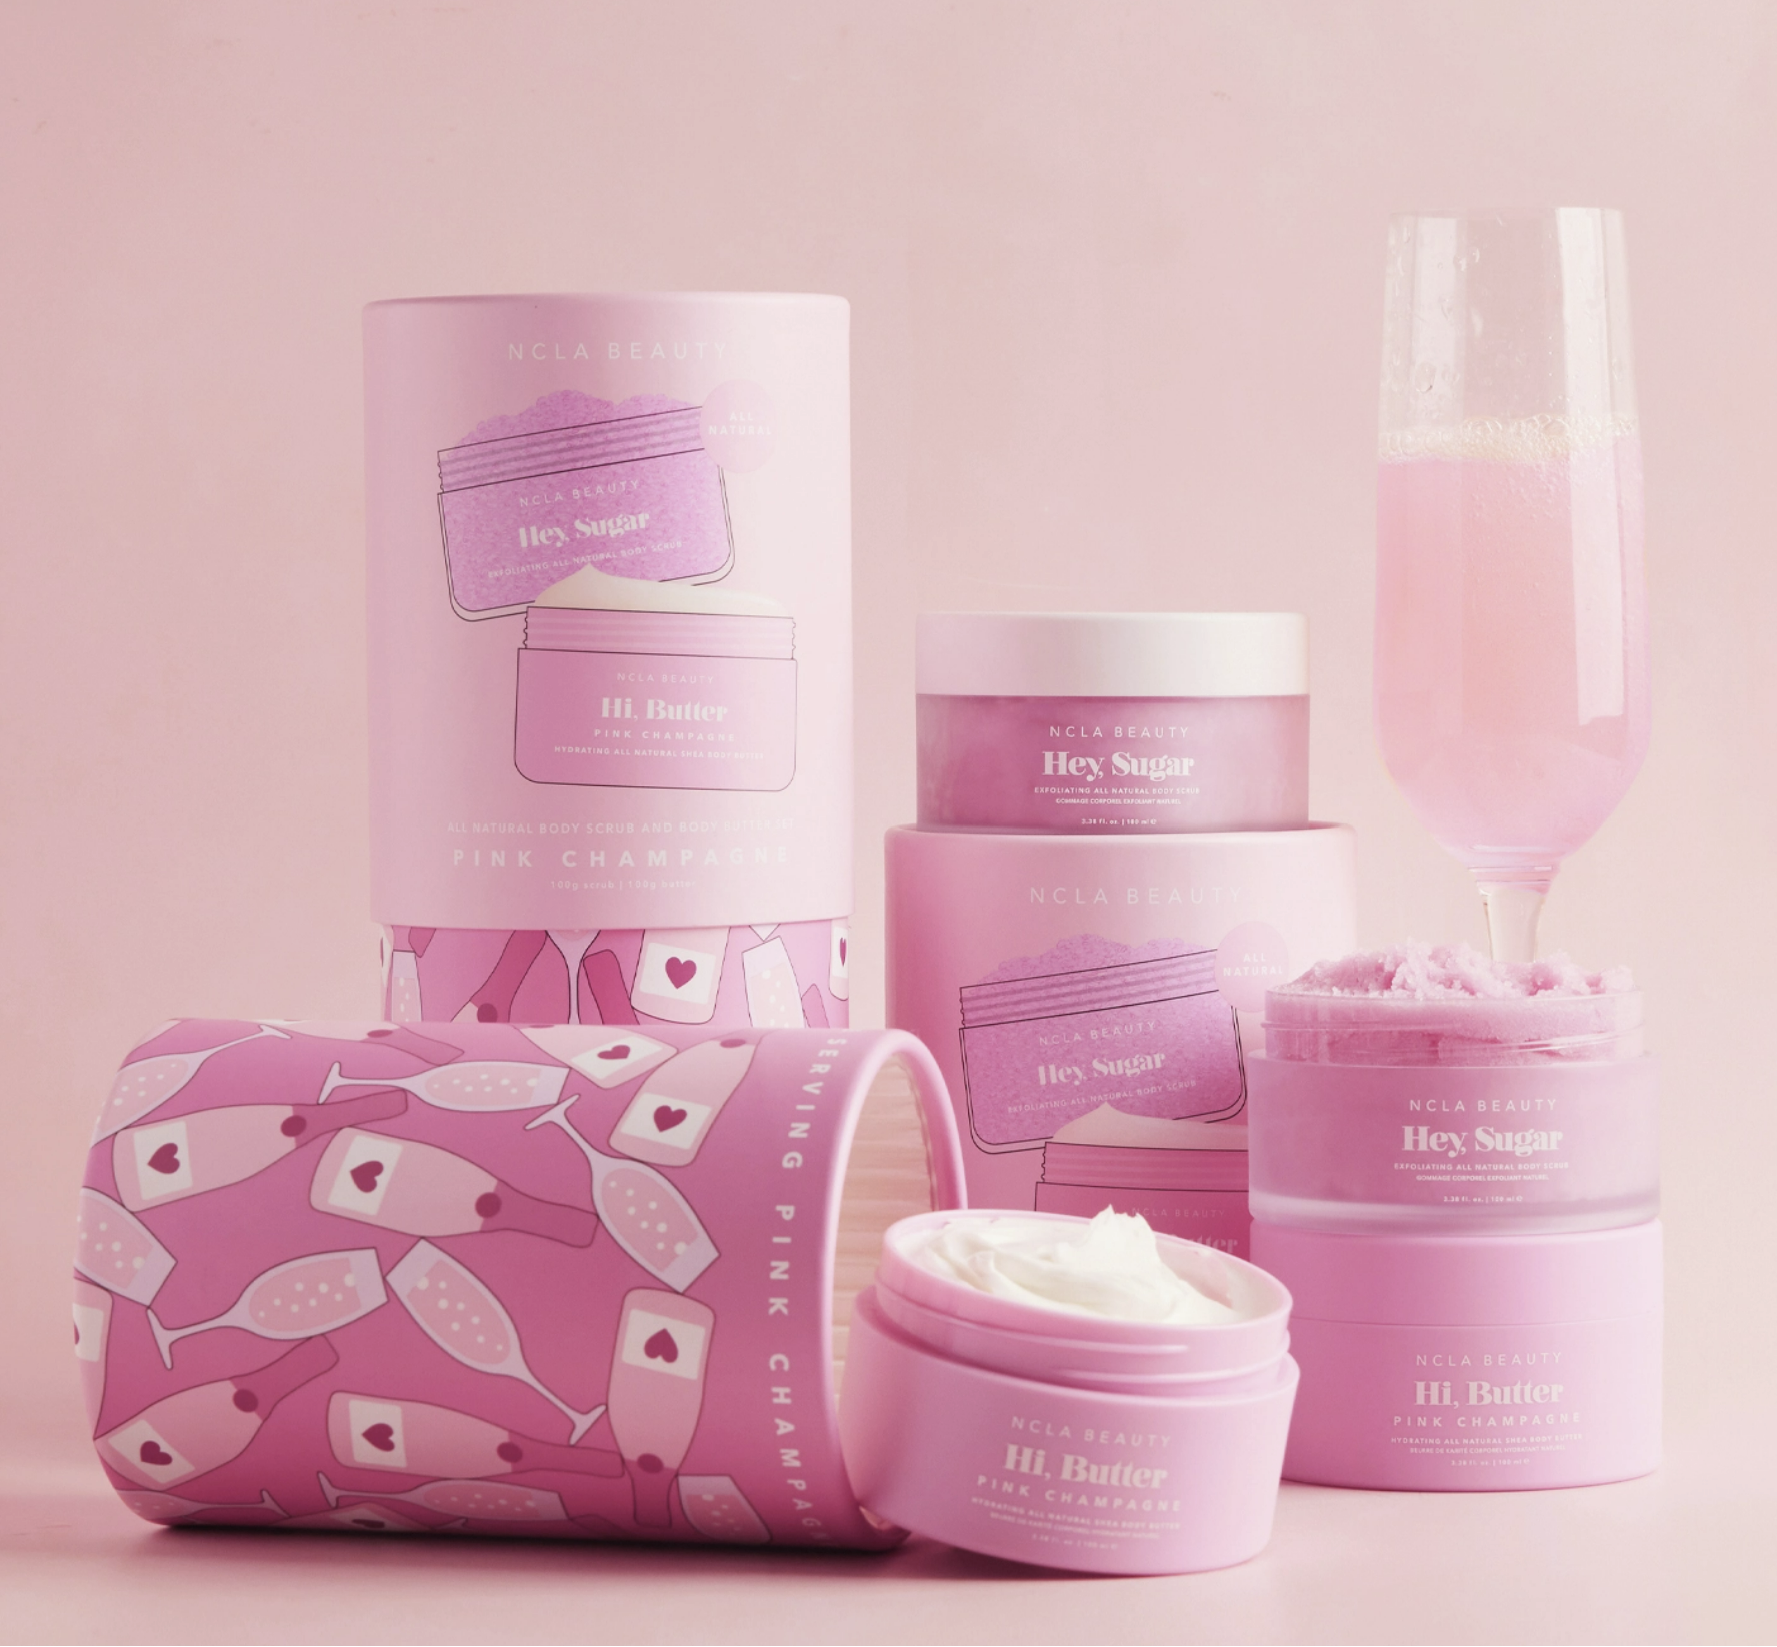 scrub and body butter set pink